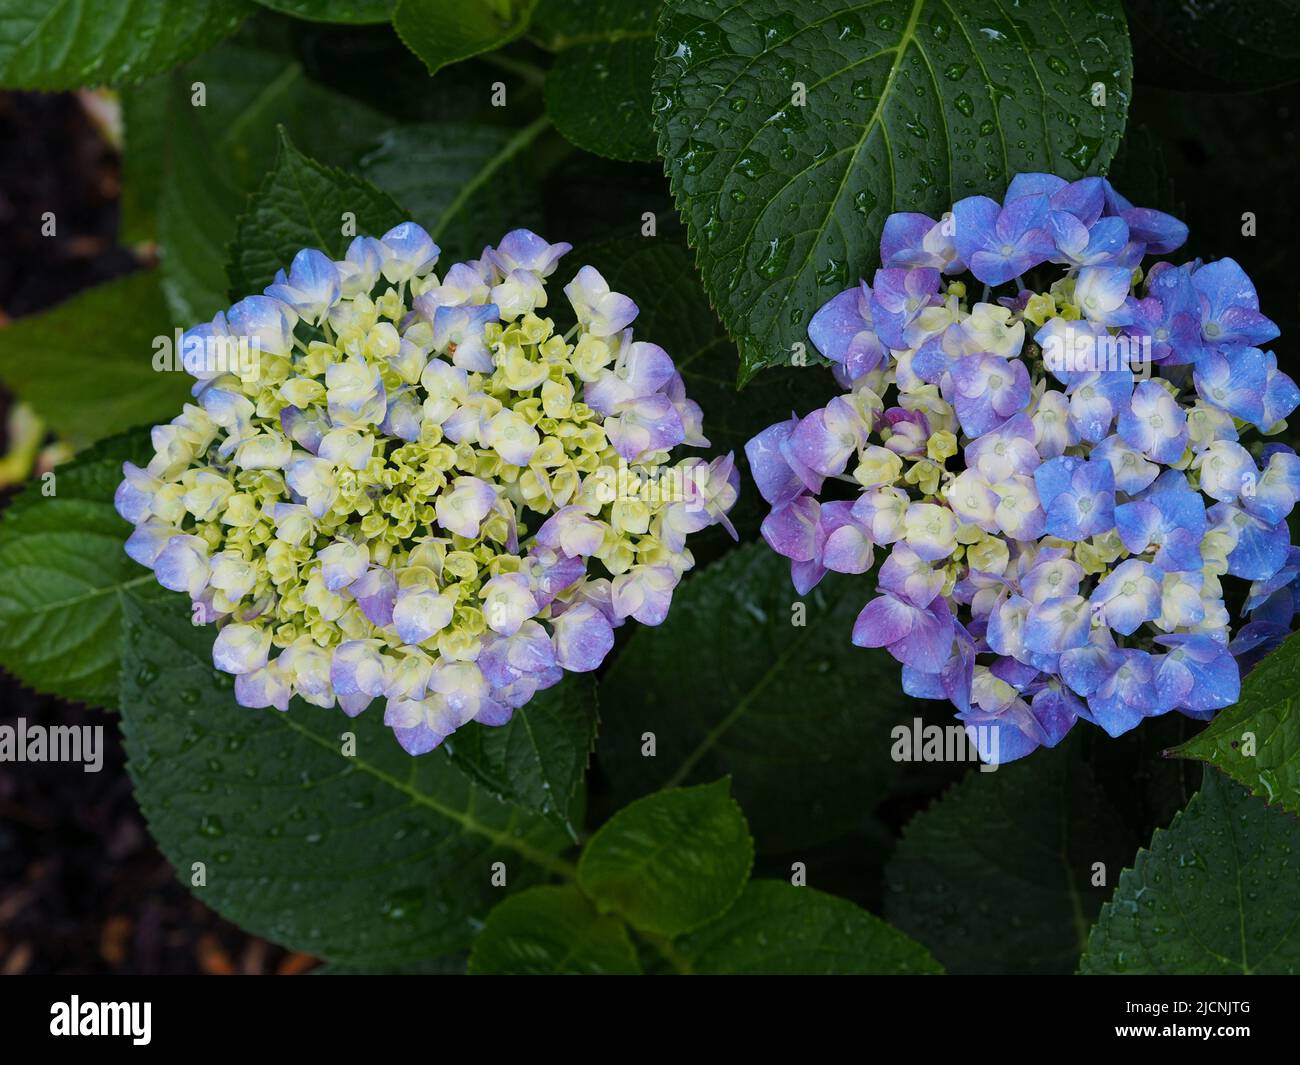 Hydrangea flowers in partial to full bloom after a rain shower in a garden in Ottawa, Ontario, Canada. Stock Photo